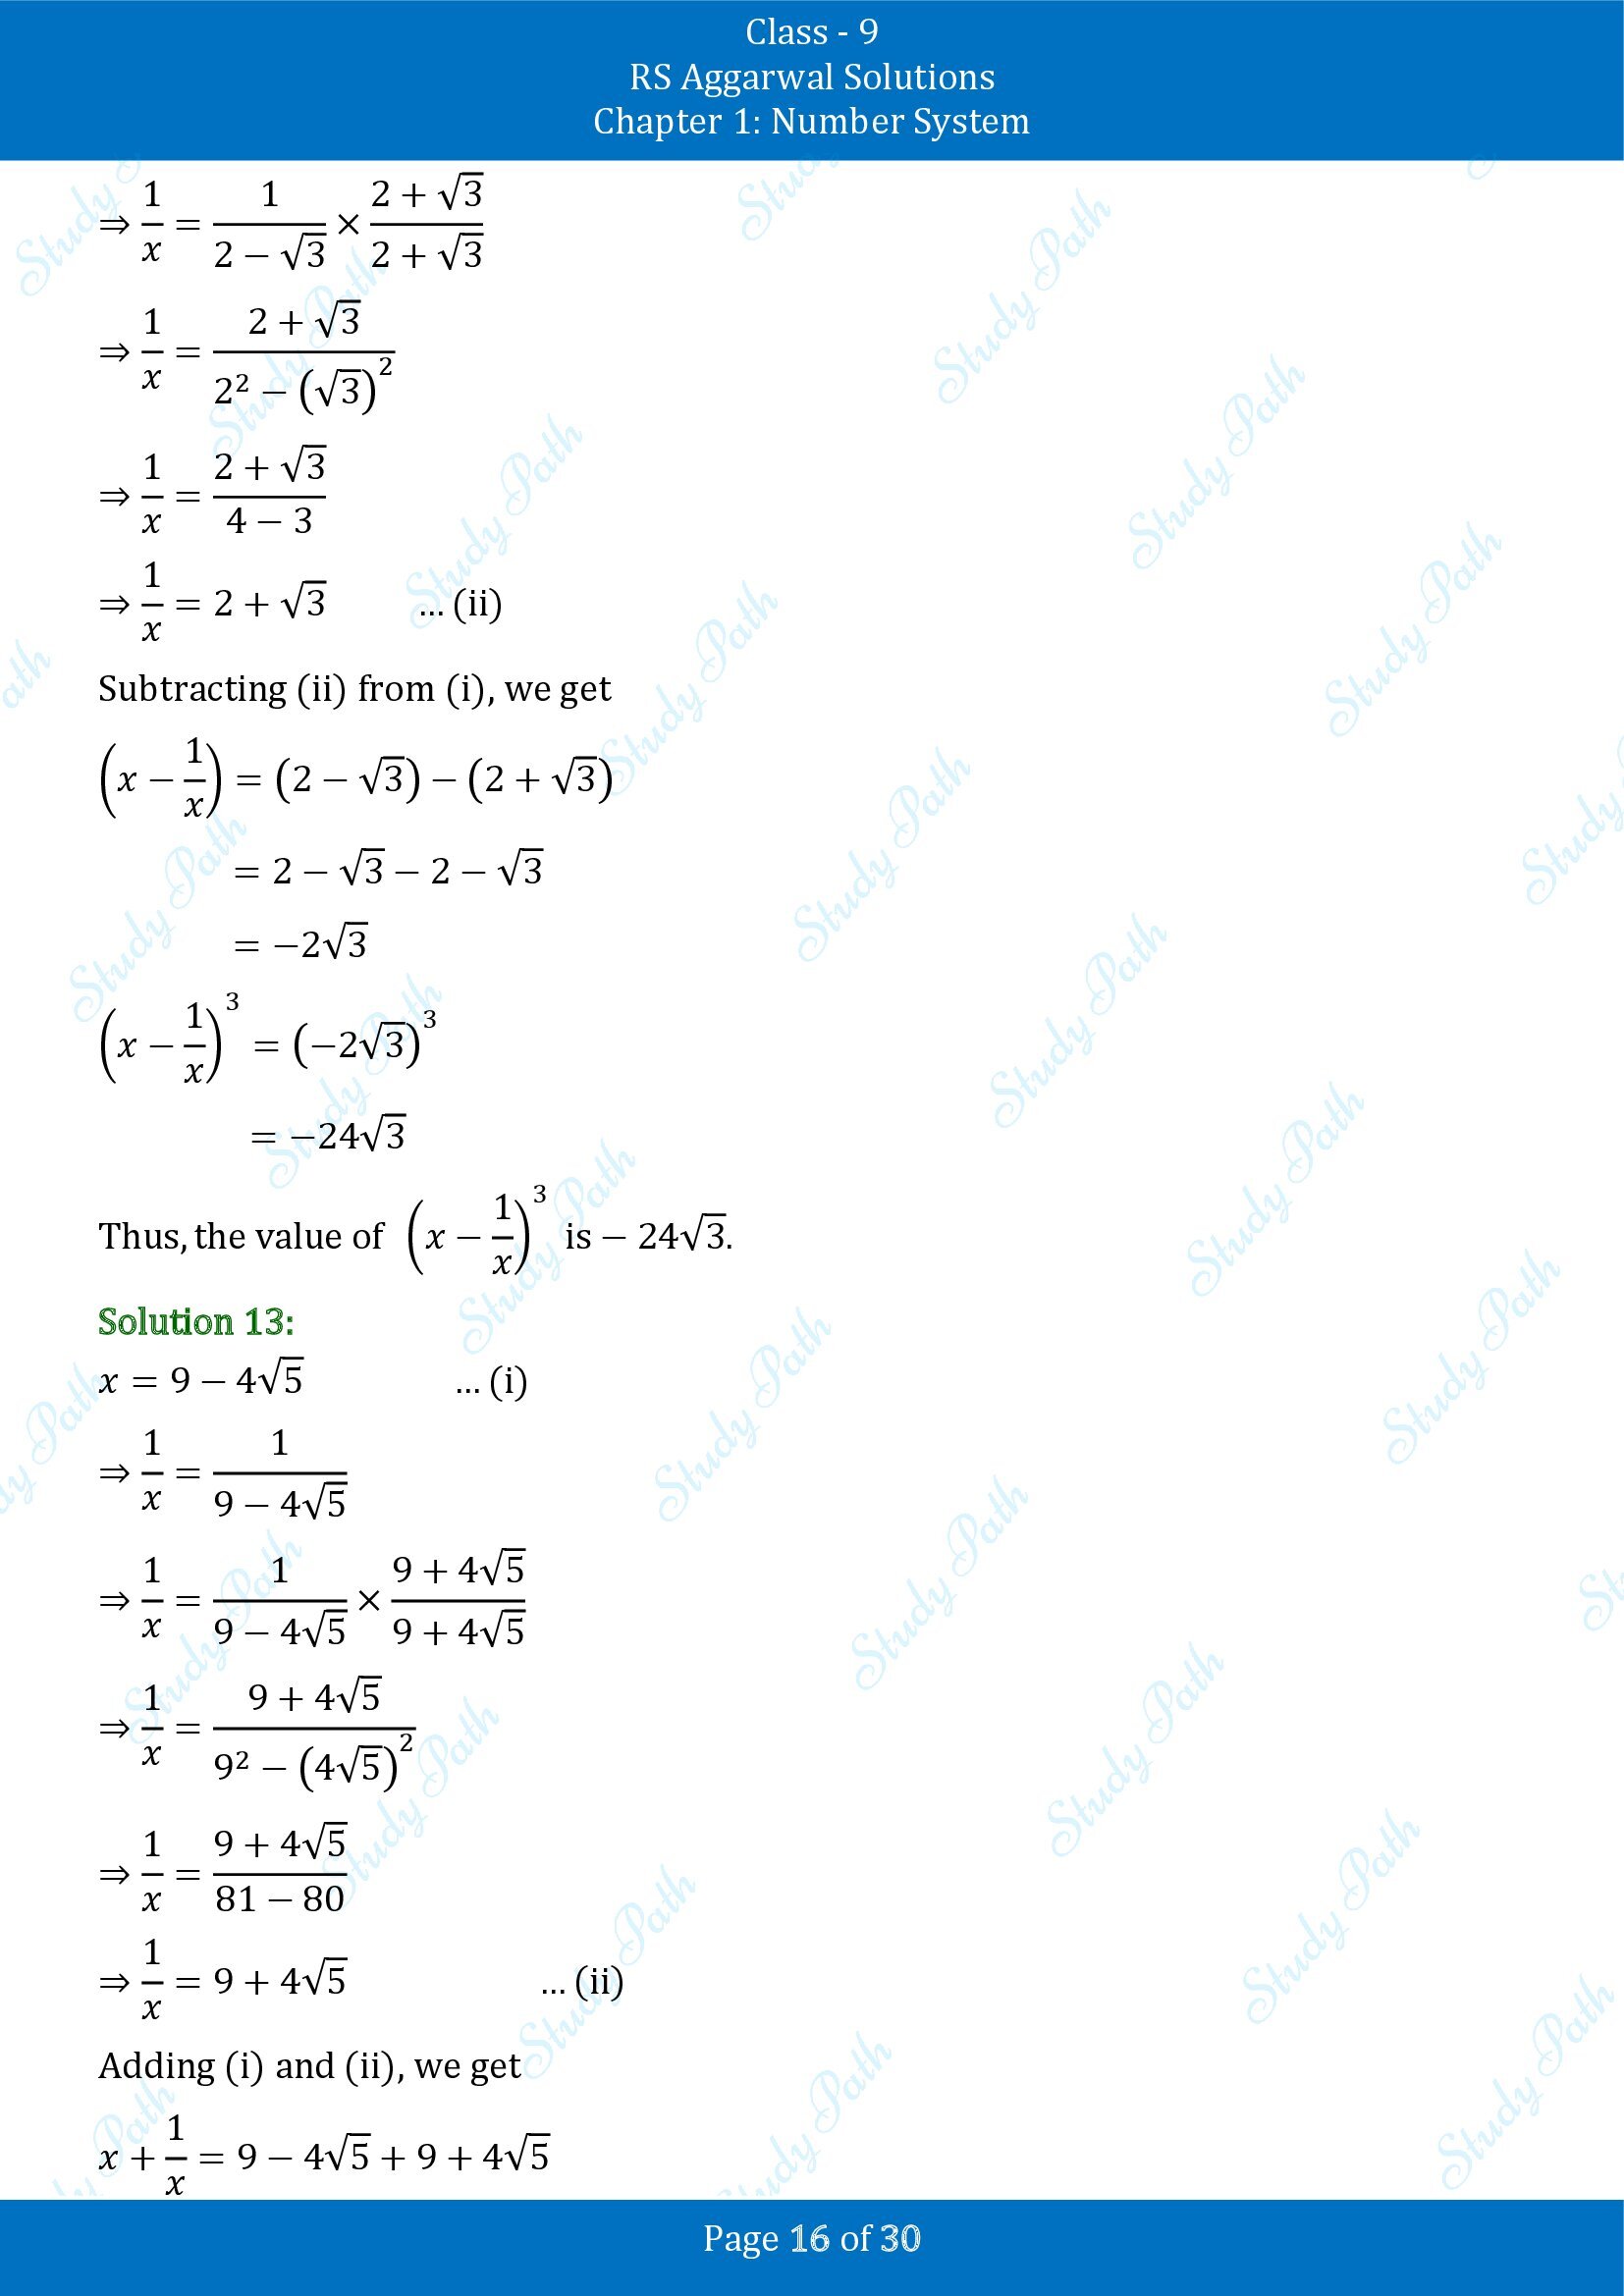 RS Aggarwal Solutions Class 9 Chapter 1 Number System Exercise 1F 00016